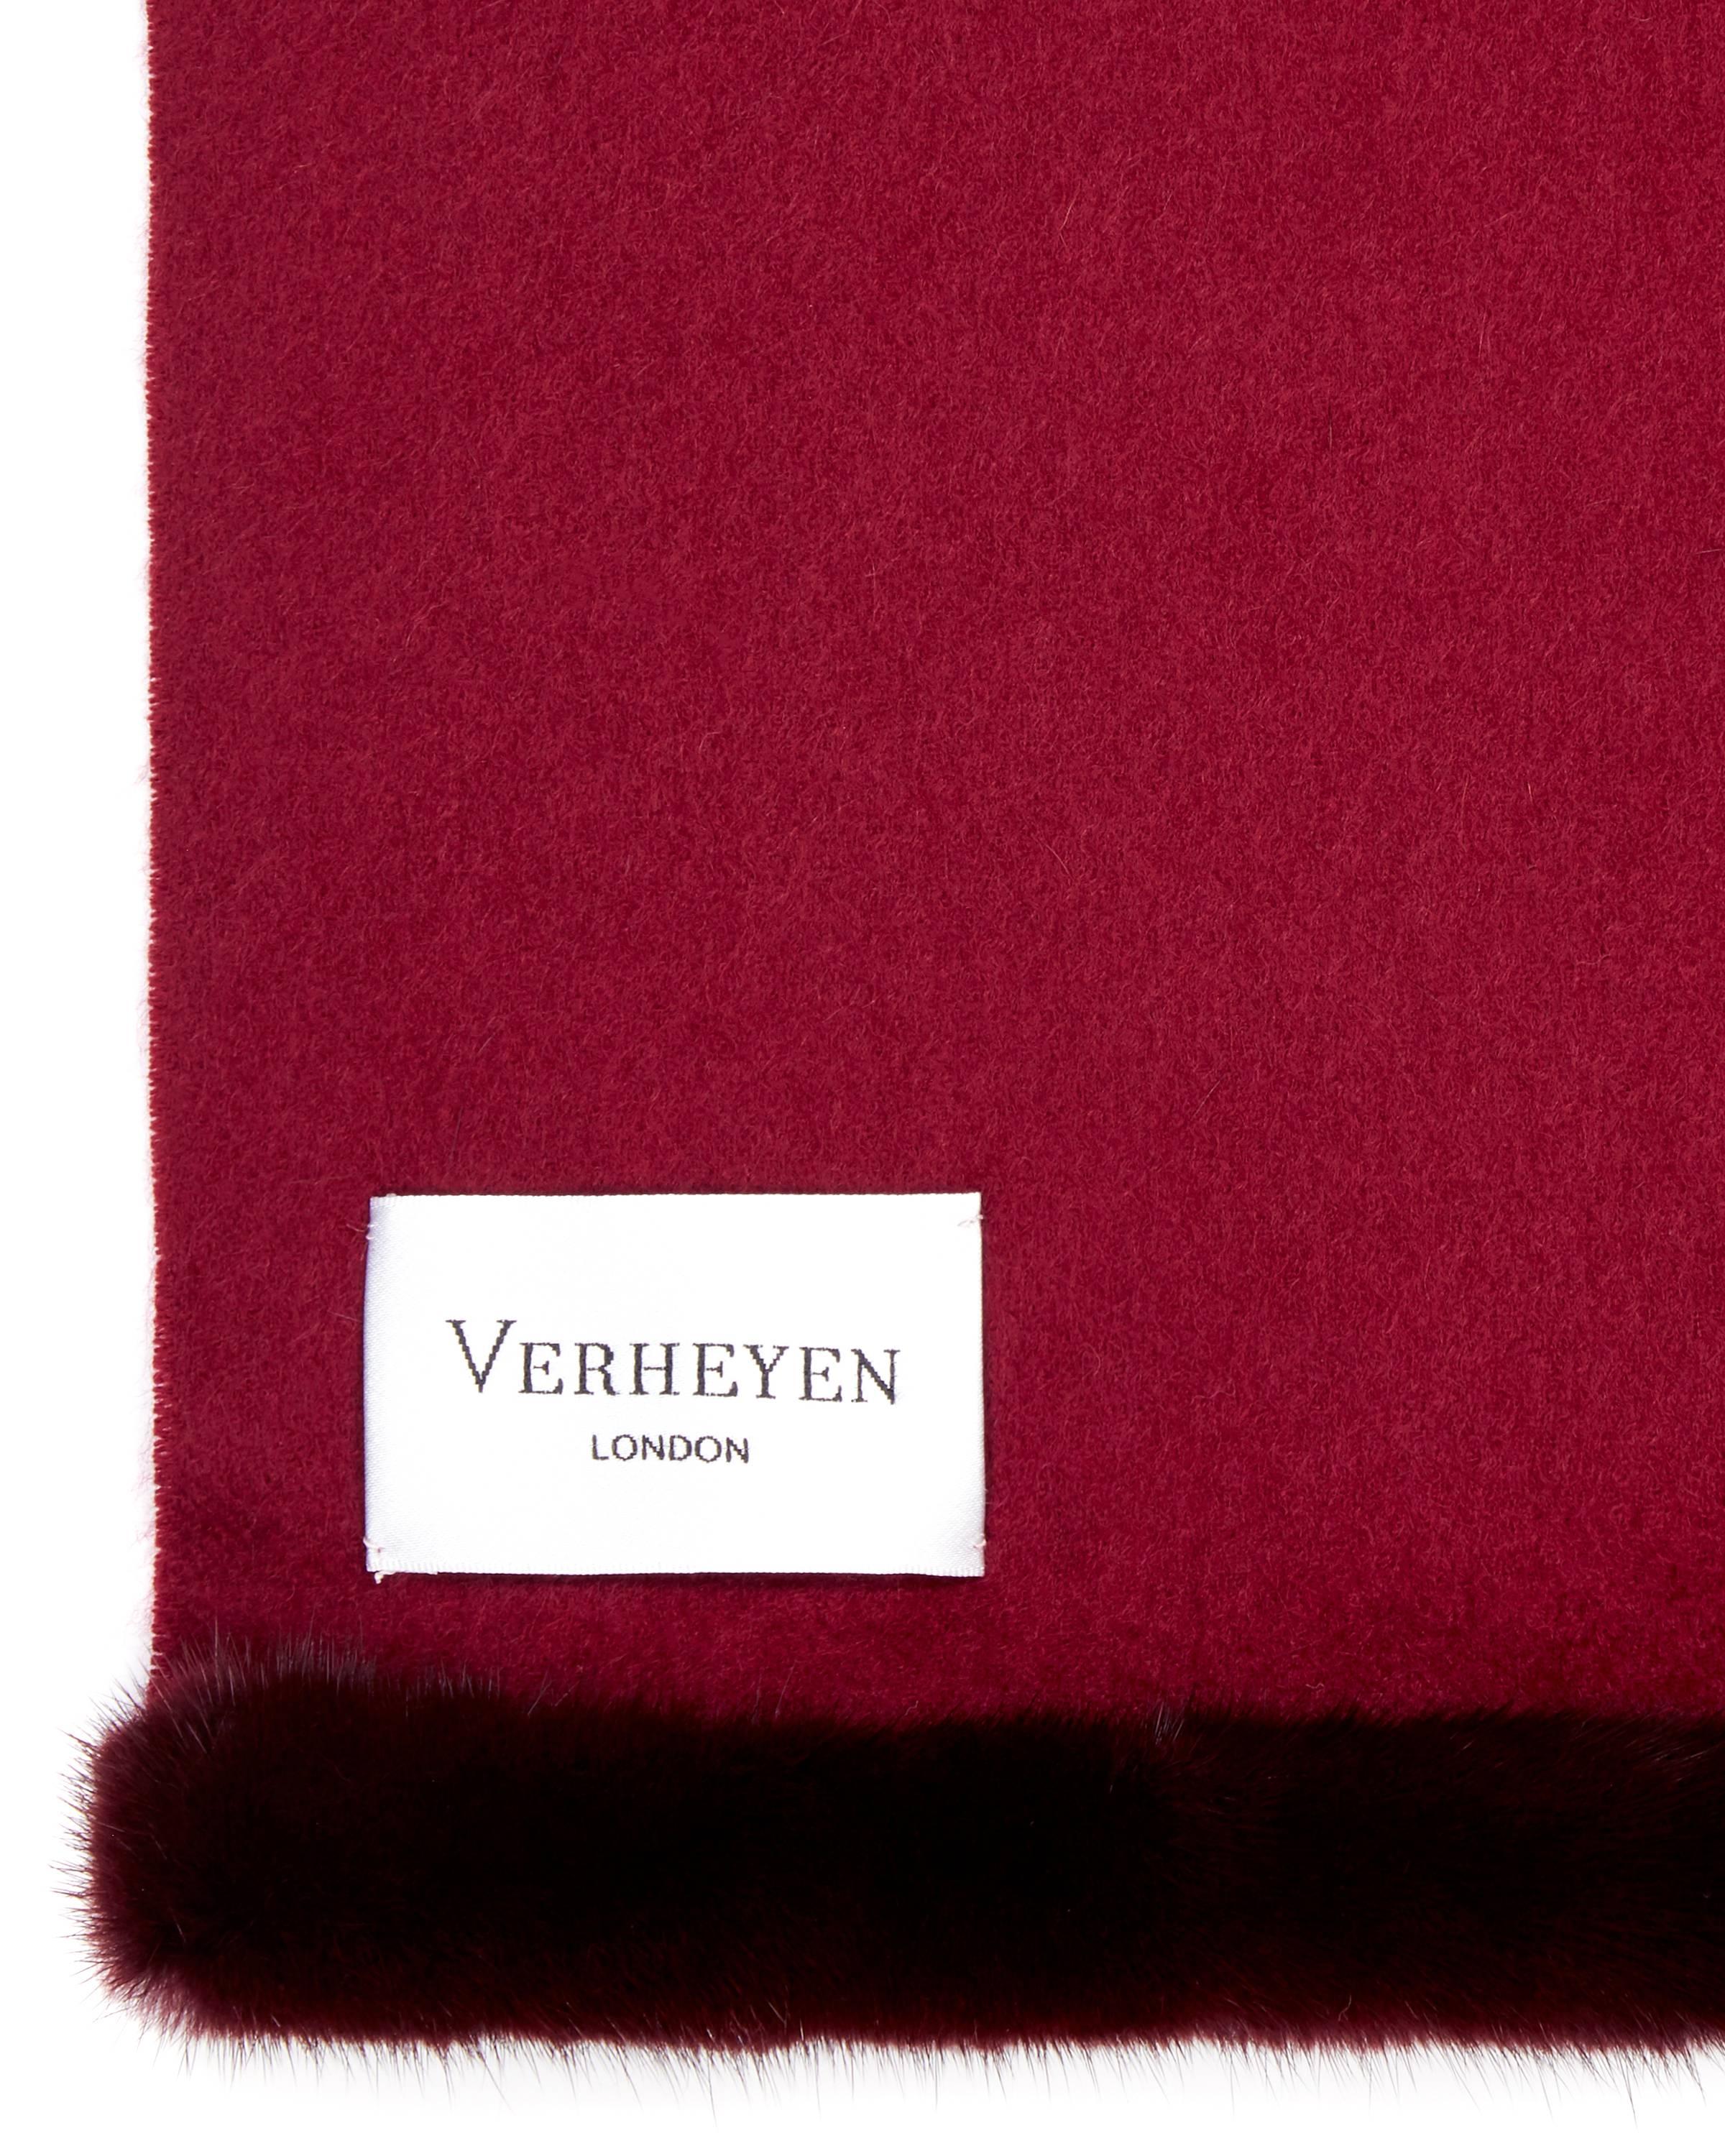 Verheyen London Mink Fur Trimmed Cashmere Scarf in Burgundy - Brand New 

Verheyen London’s shawl is spun from the finest Scottish woven cashmere and finished with the most exquisite dyed mink. Its warmth envelopes you with luxury, perfect for